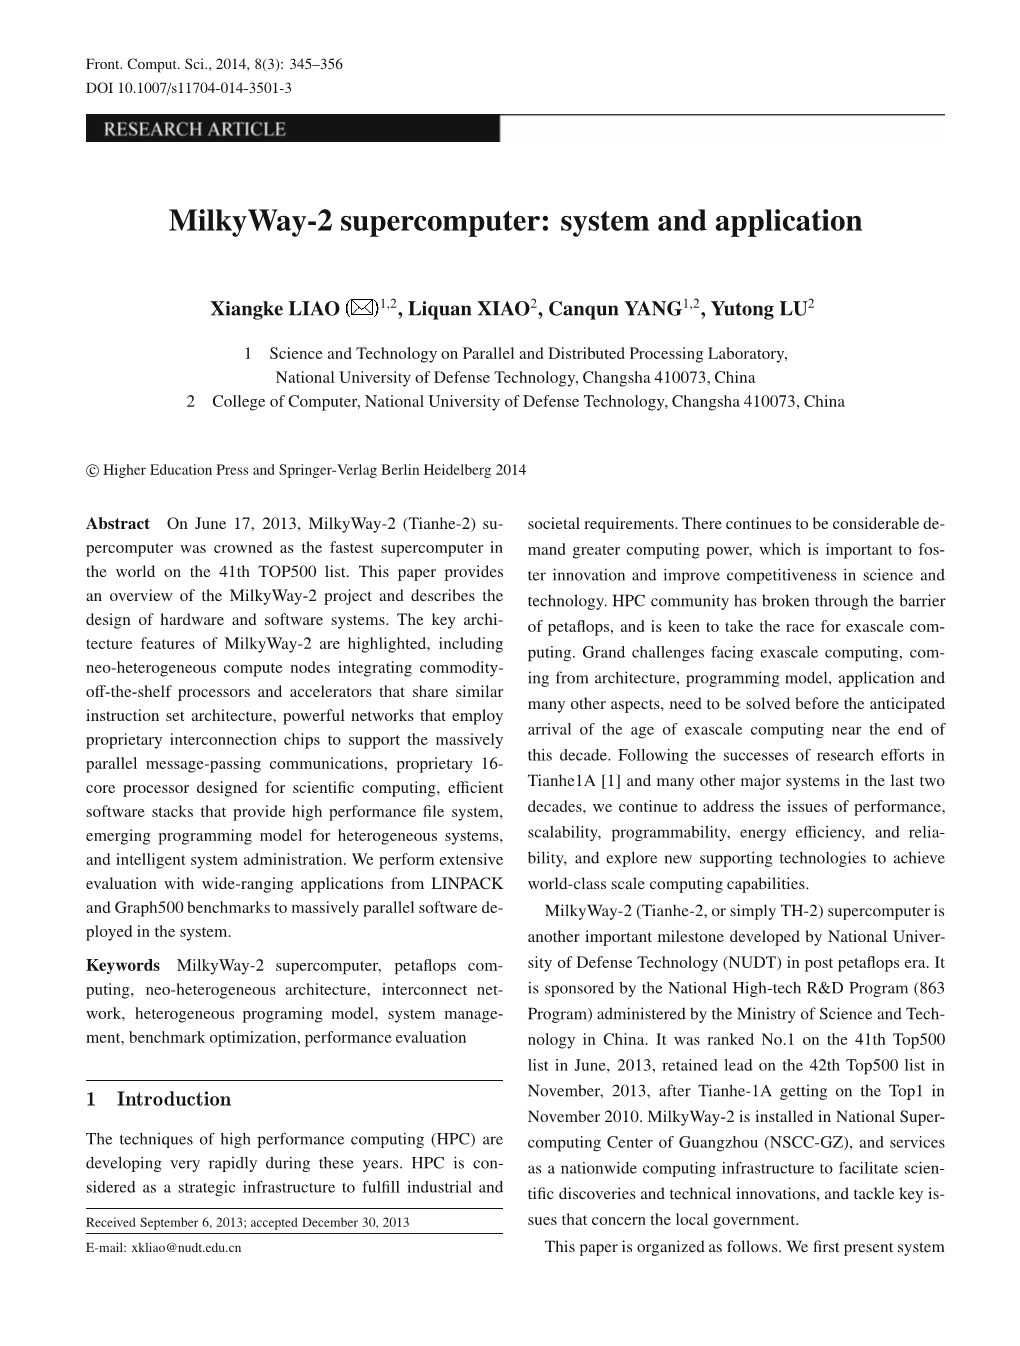 Milkyway-2 Supercomputer: System and Application